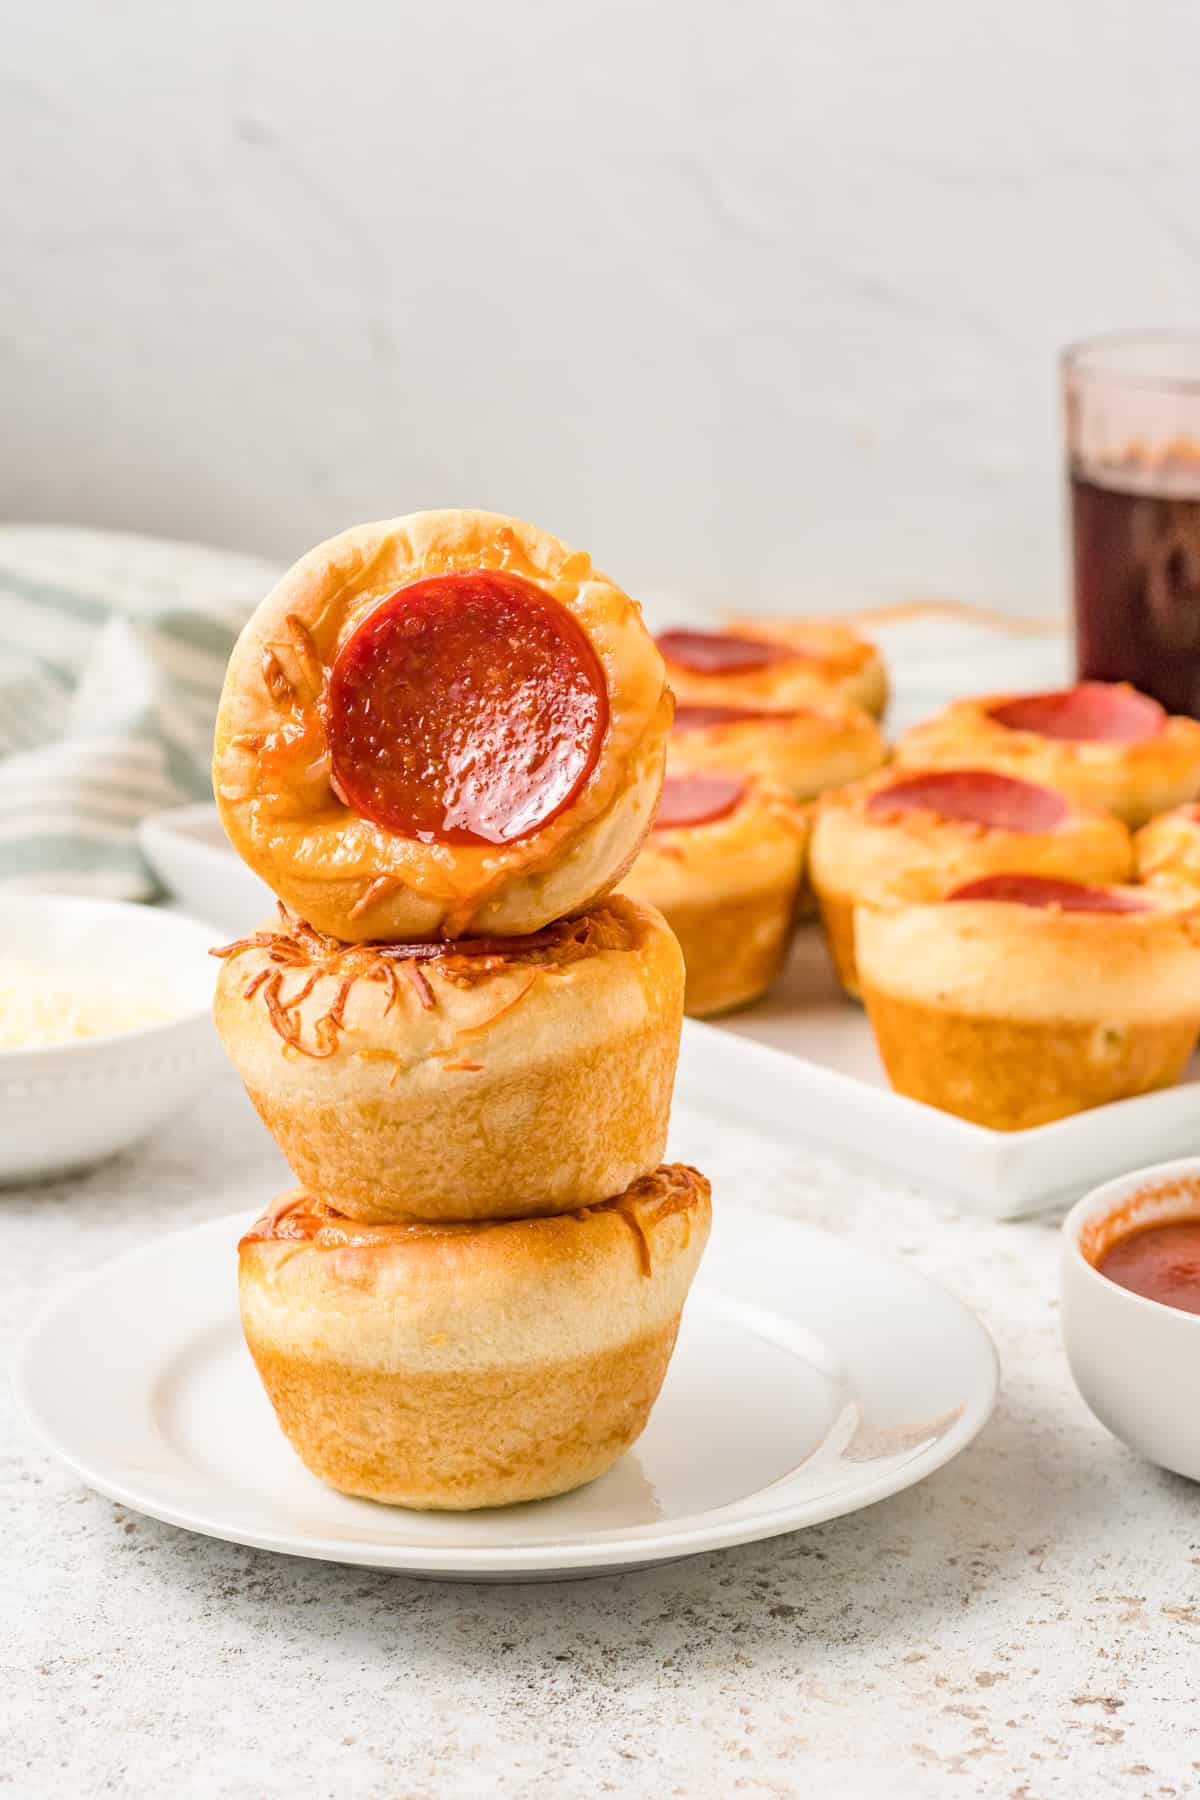 a turned pizza cupcake stacked on 2 upright pizza cupcakes on a white plate.